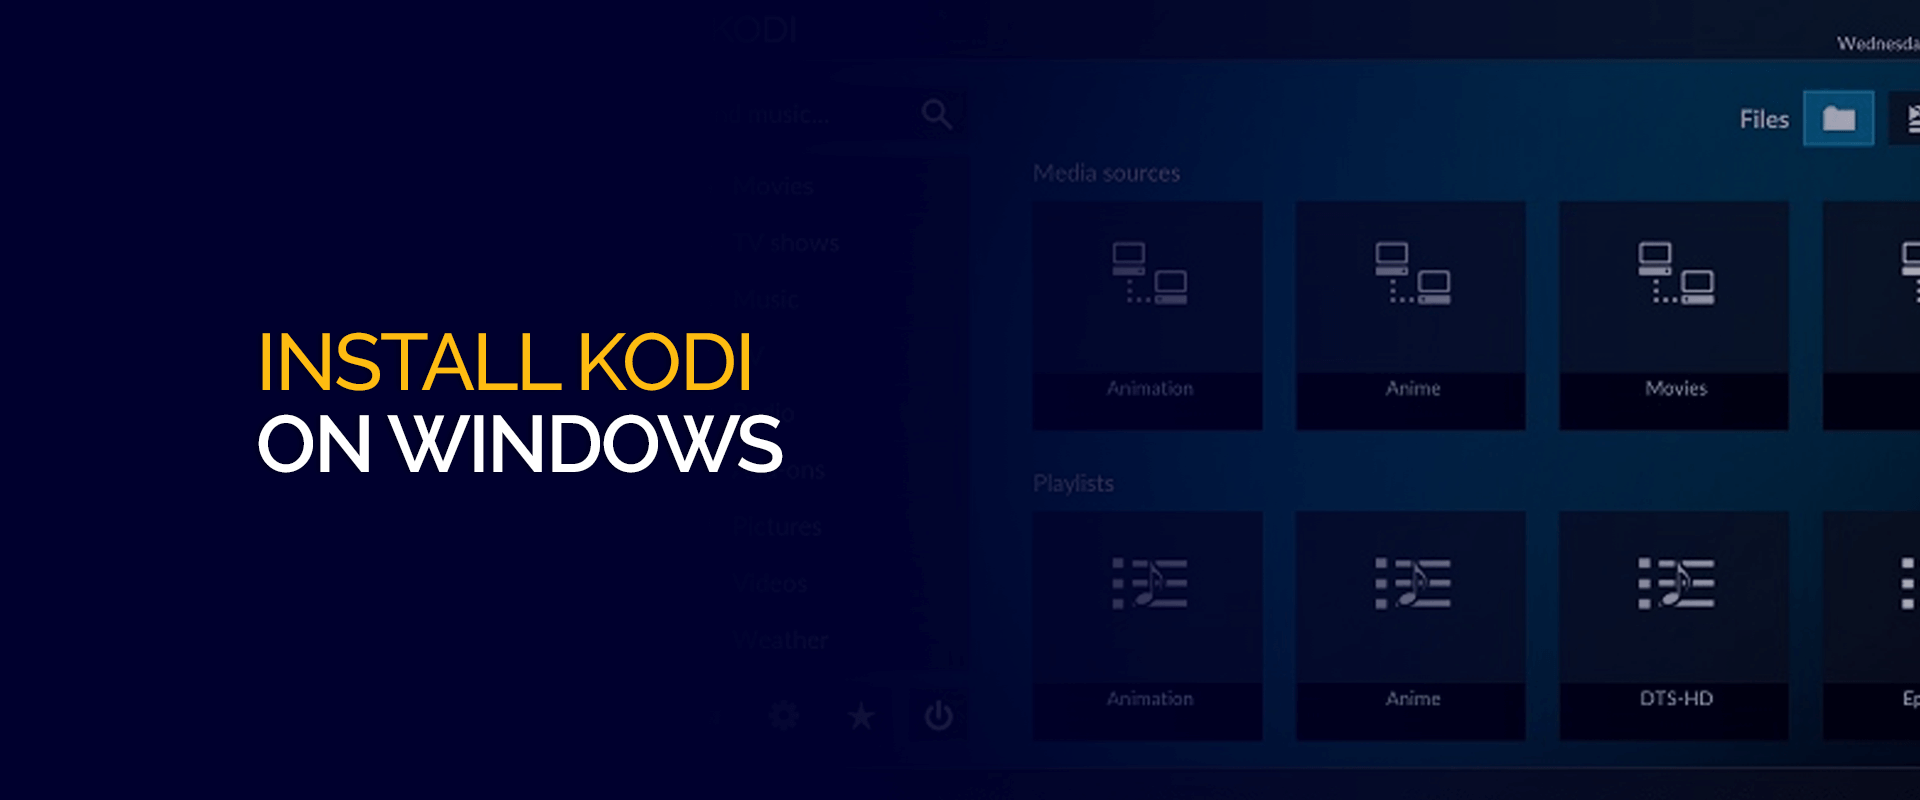 After the successful installation, open the Kodi software.